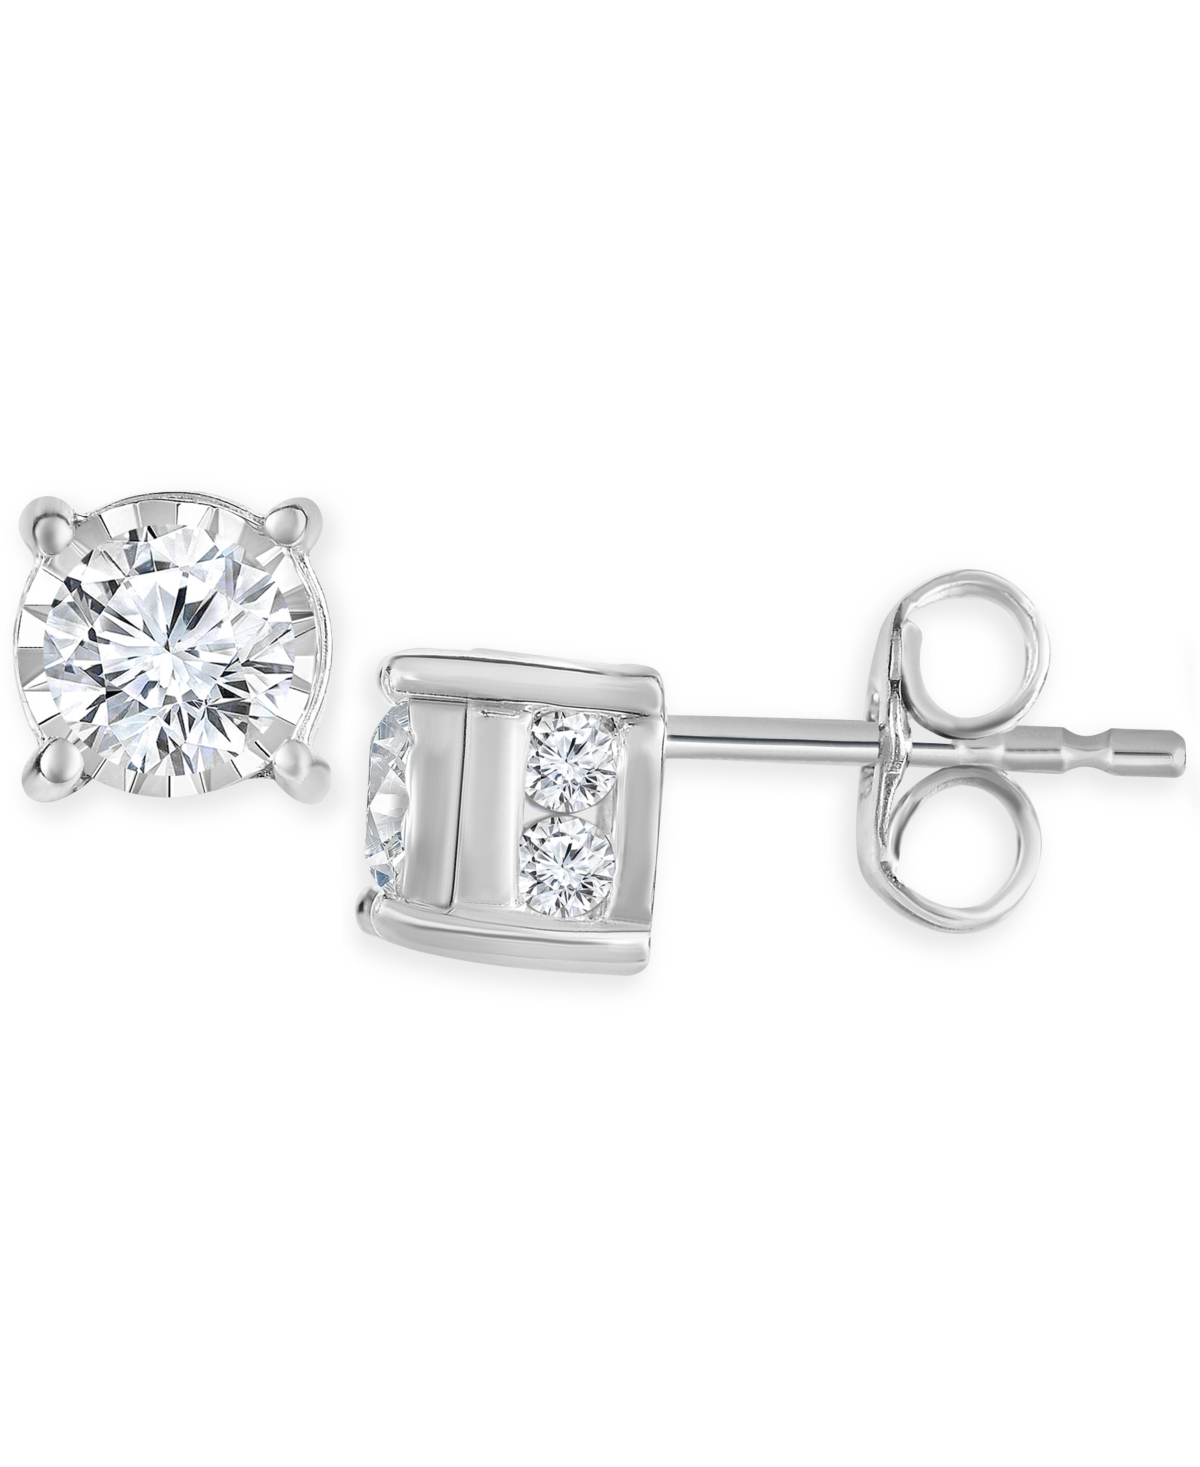 Diamond Stud Earrings (3/4 ct. t.w.) in 14k White, Yellow or Rose Gold - Rose Gold